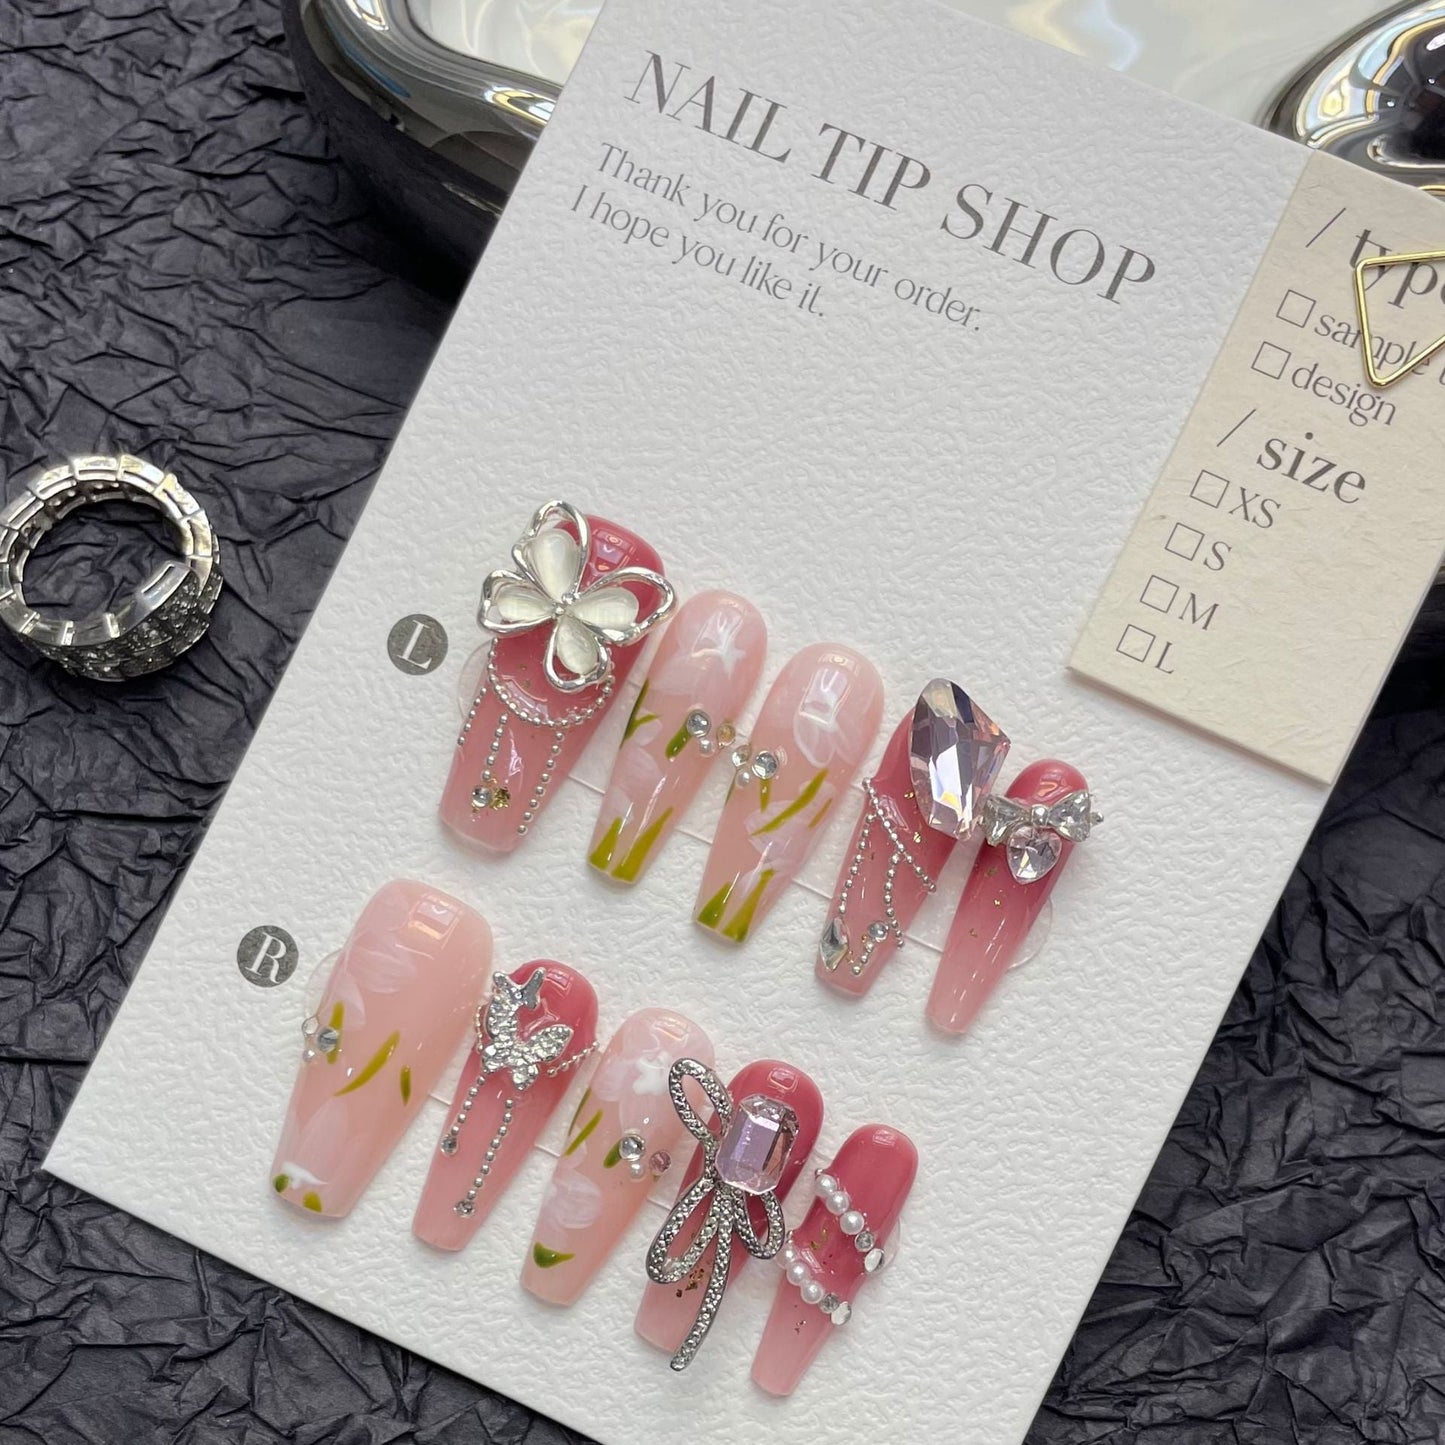 1255 Butterfly style press on nails 100% handmade false nails pink